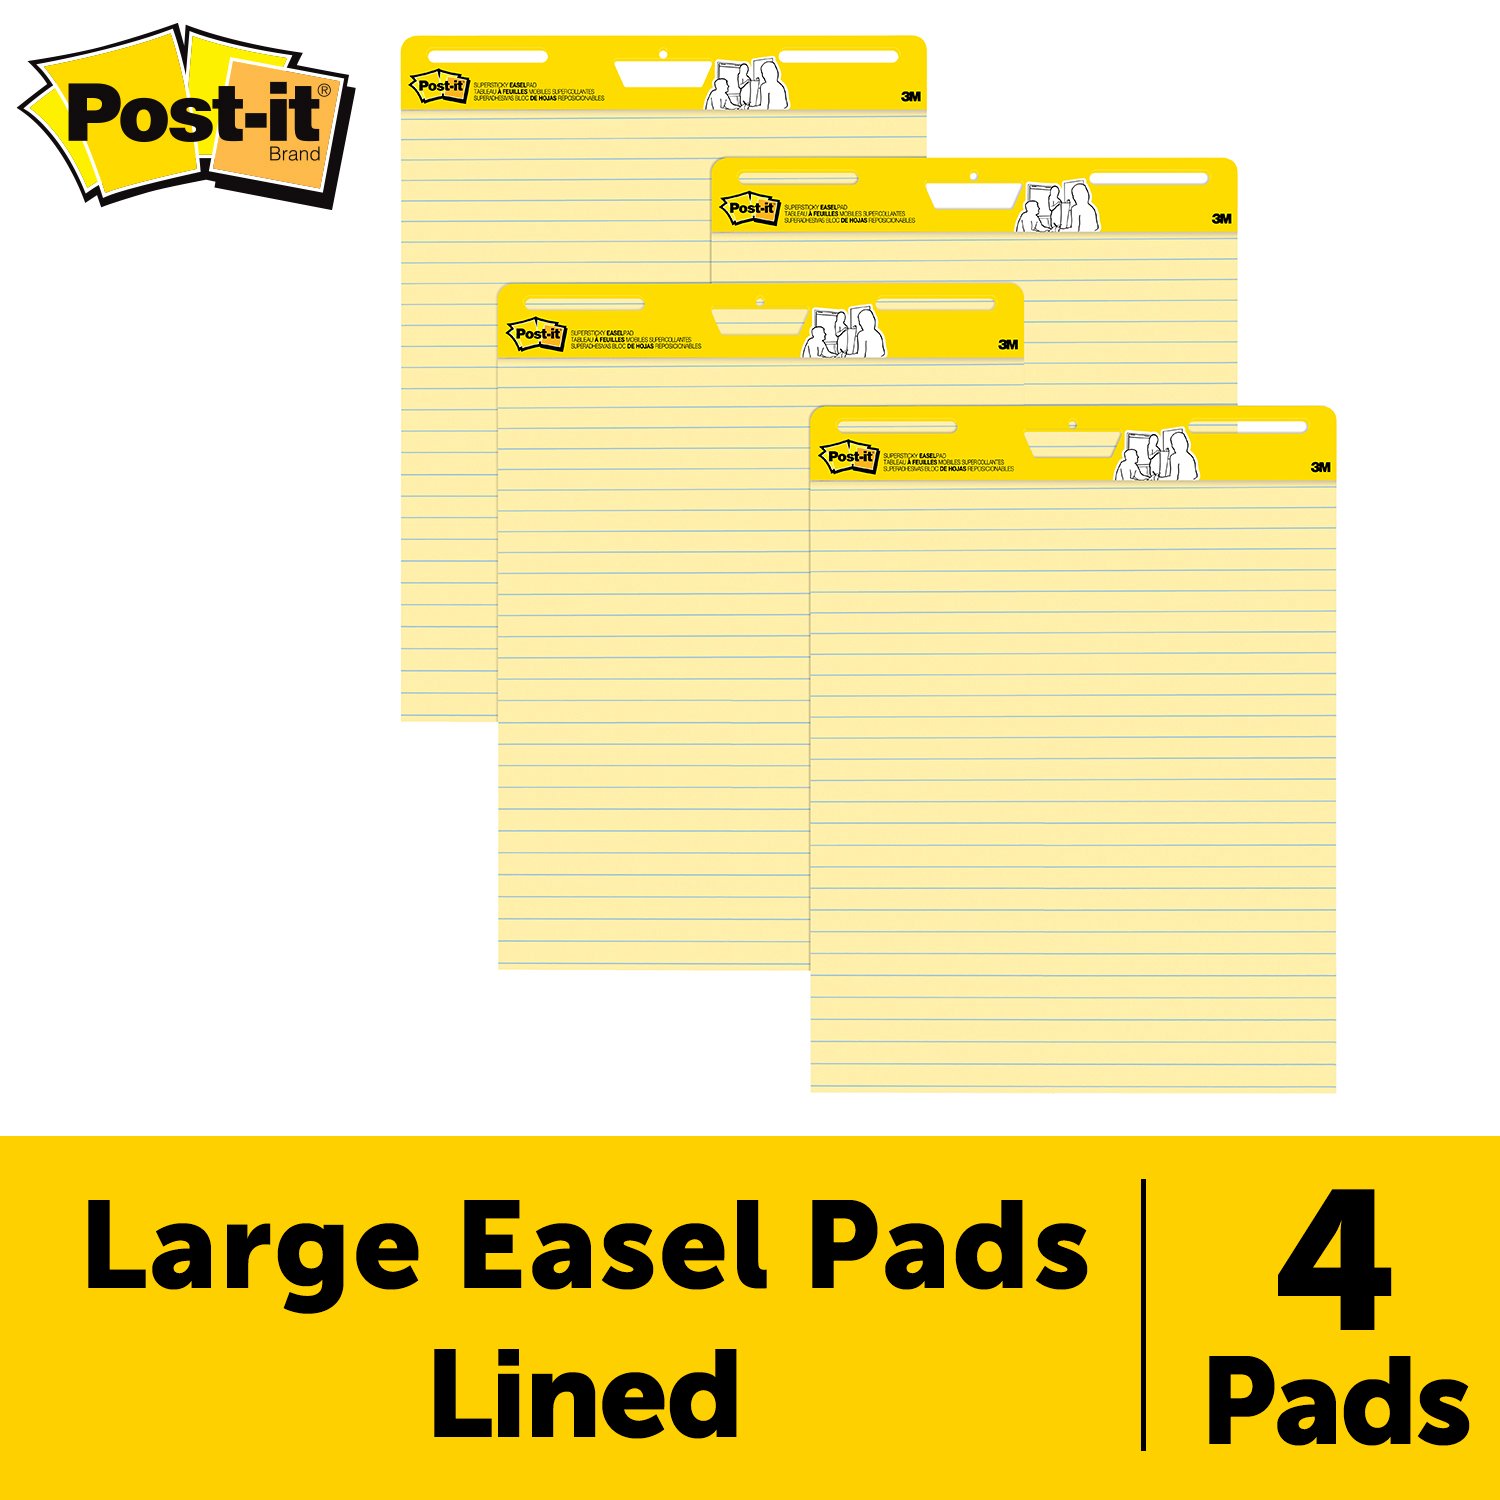 7010385082 - Post-it Super Sticky Easel Pad 561 VAD 4PK, 25 in. x 30 in., Canary Yellow Ruled